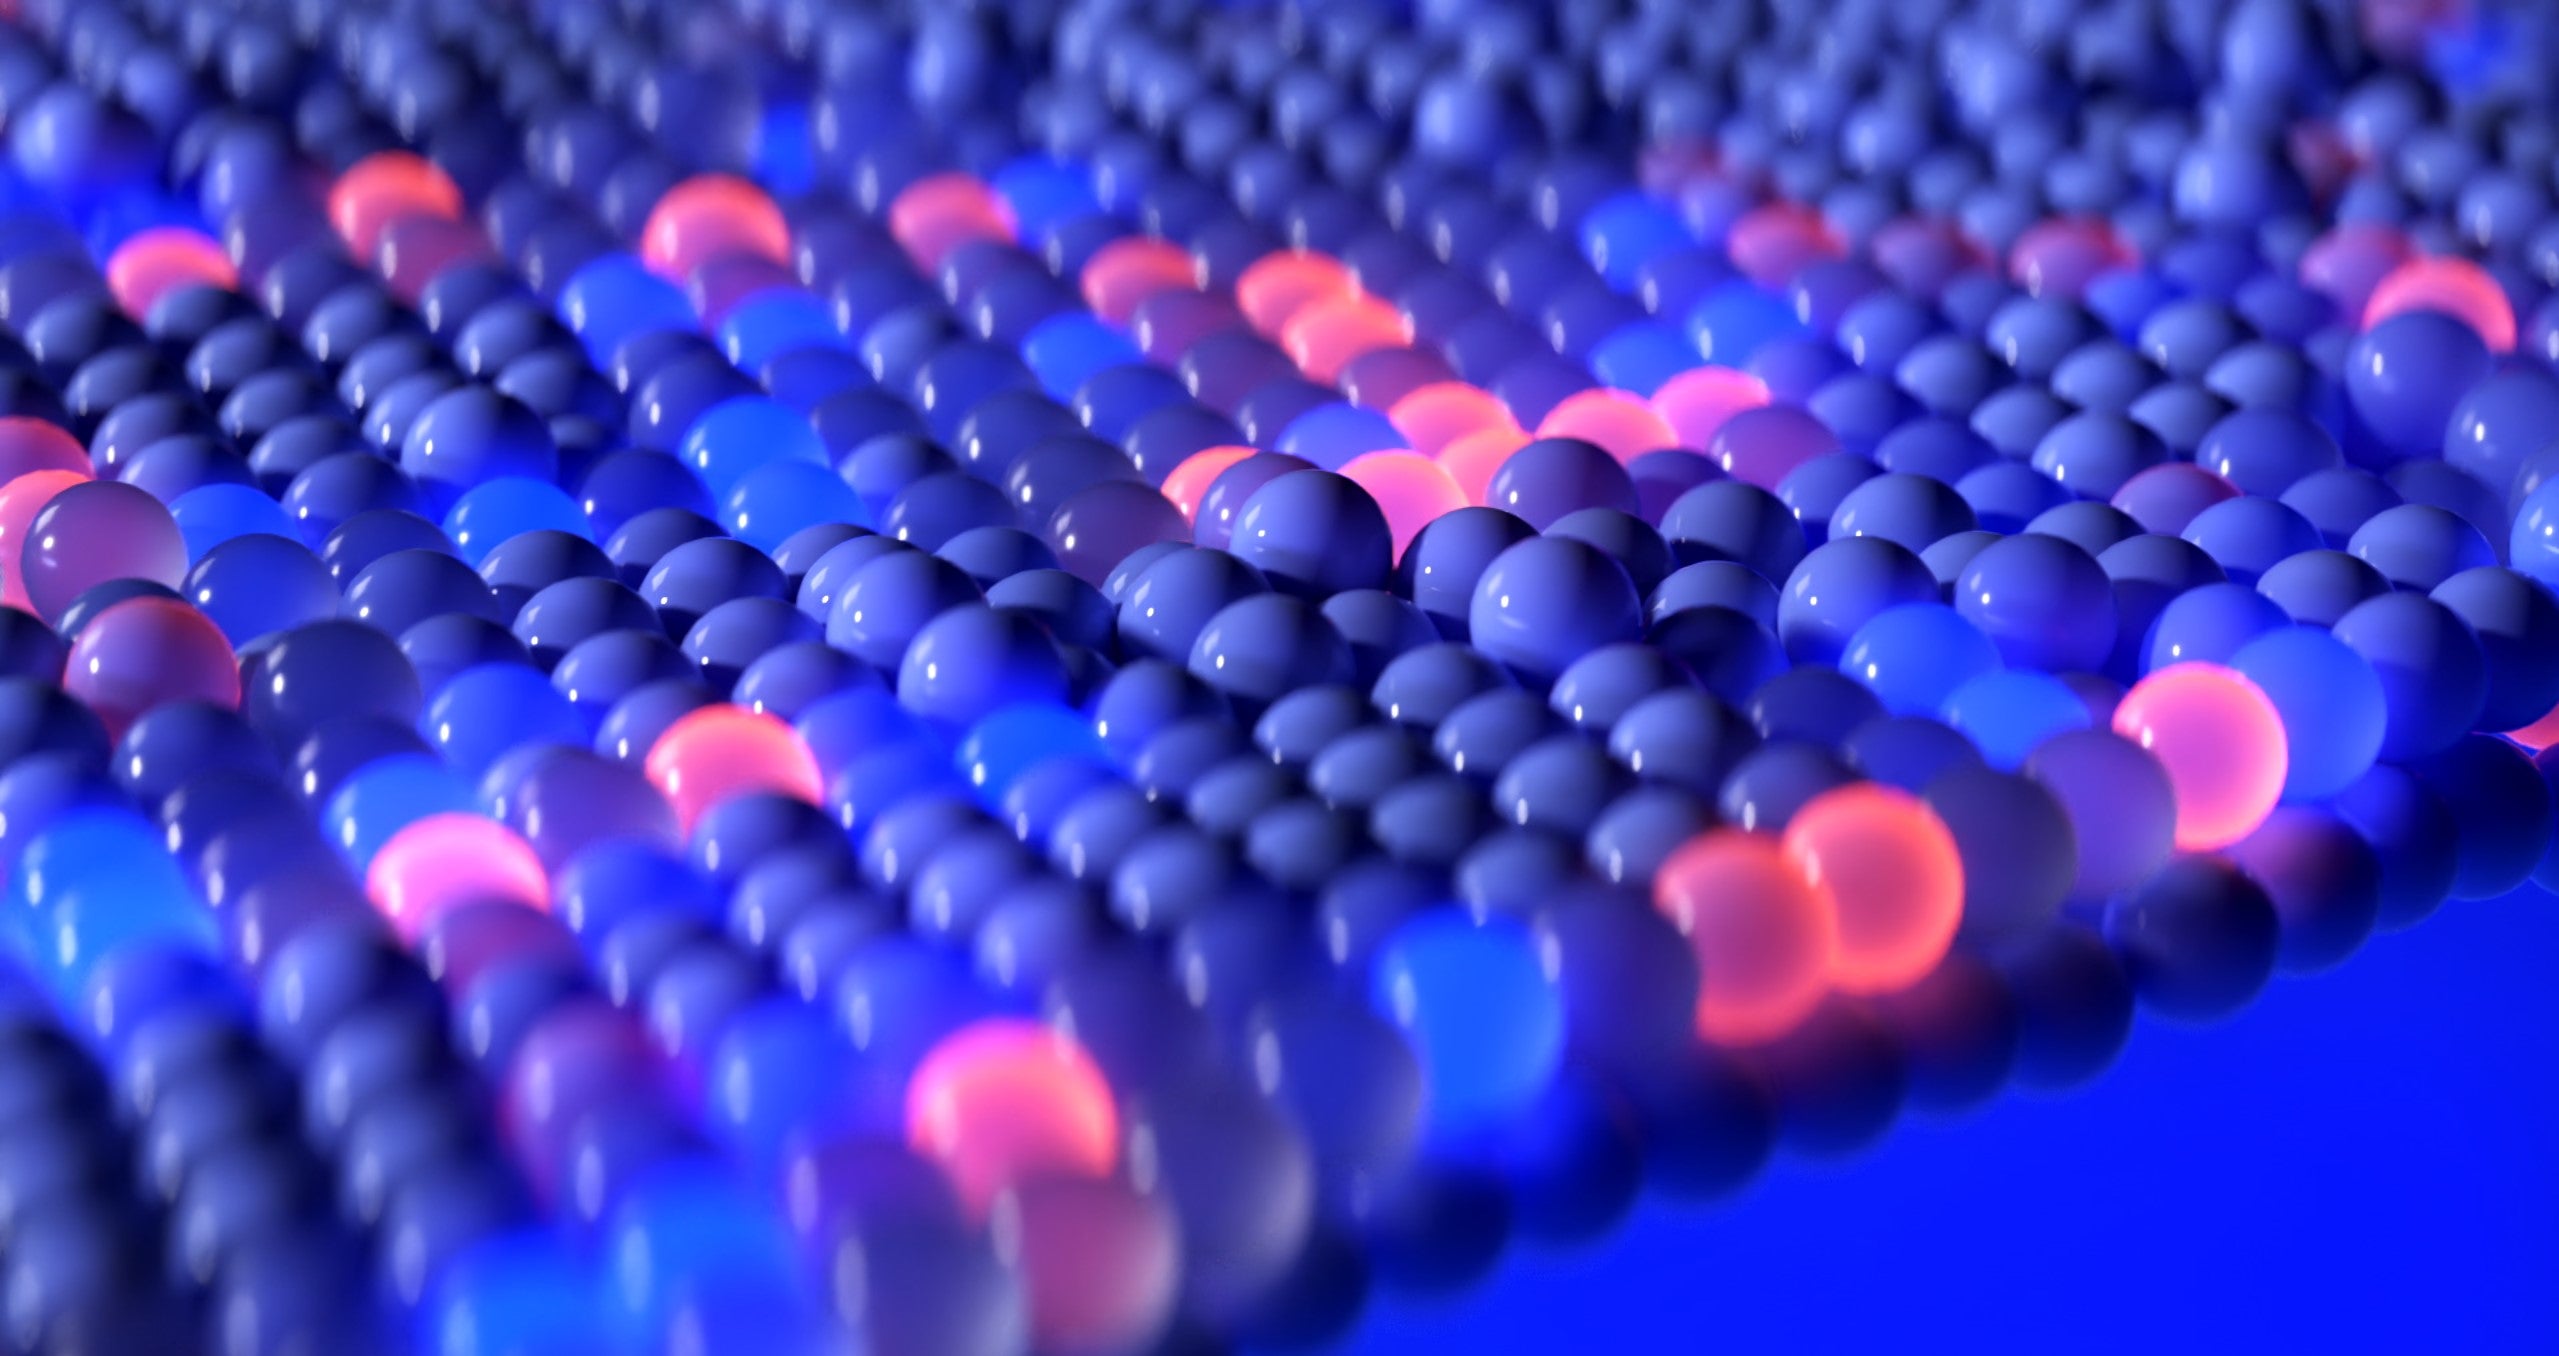 An abstract image featuring a close-up view of numerous small, spherical beads arranged in a grid. The beads are primarily blue, with some glowing in shades of pink and orange, creating a visually striking contrast. The background is blue, enhancing the vibrant colors.